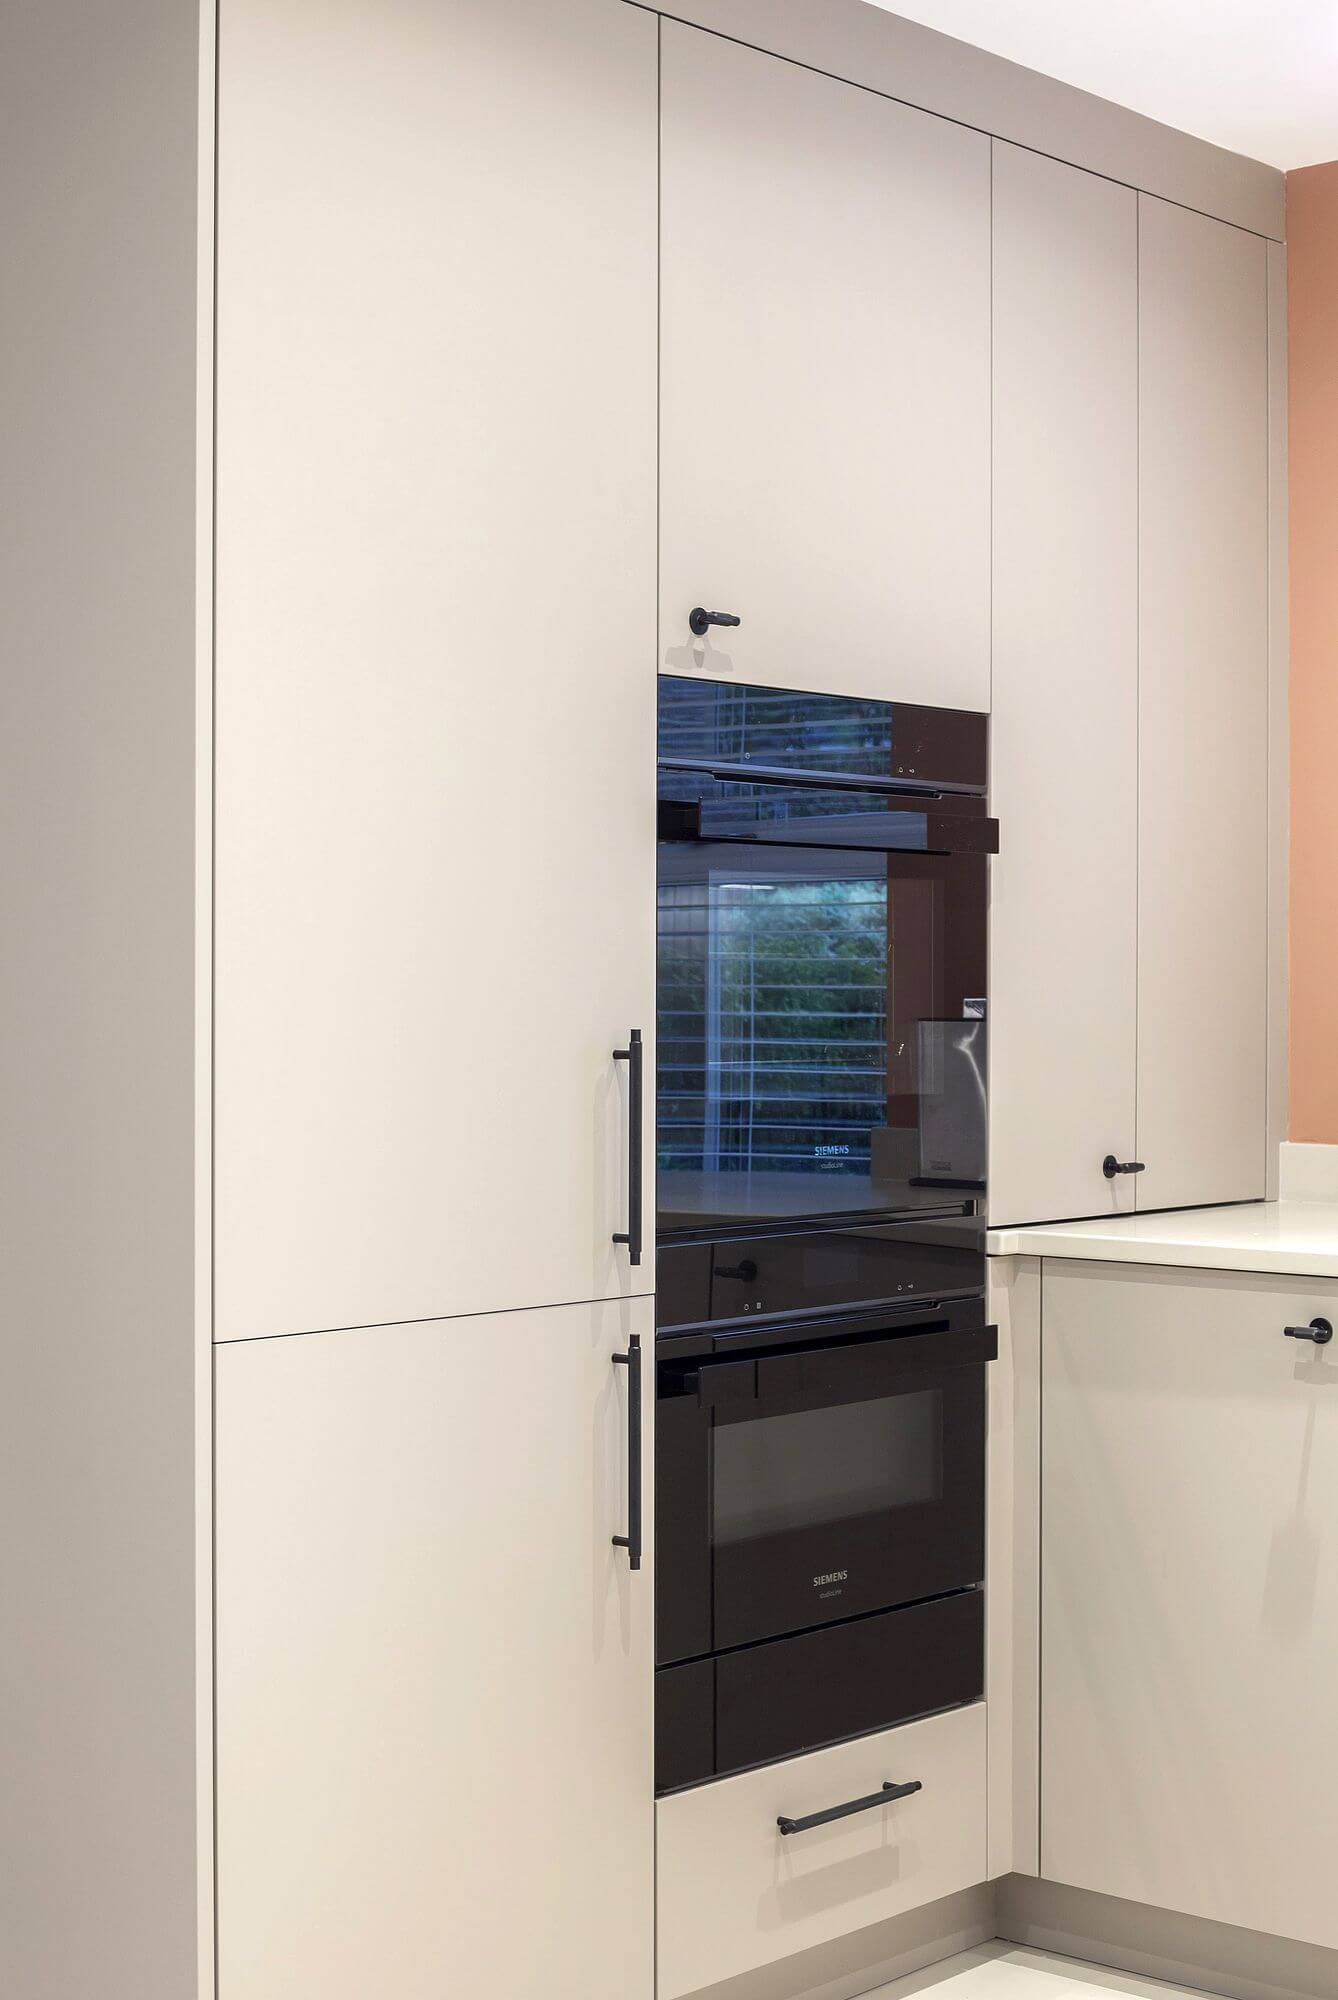 Integrated ovens in kitchen workspace